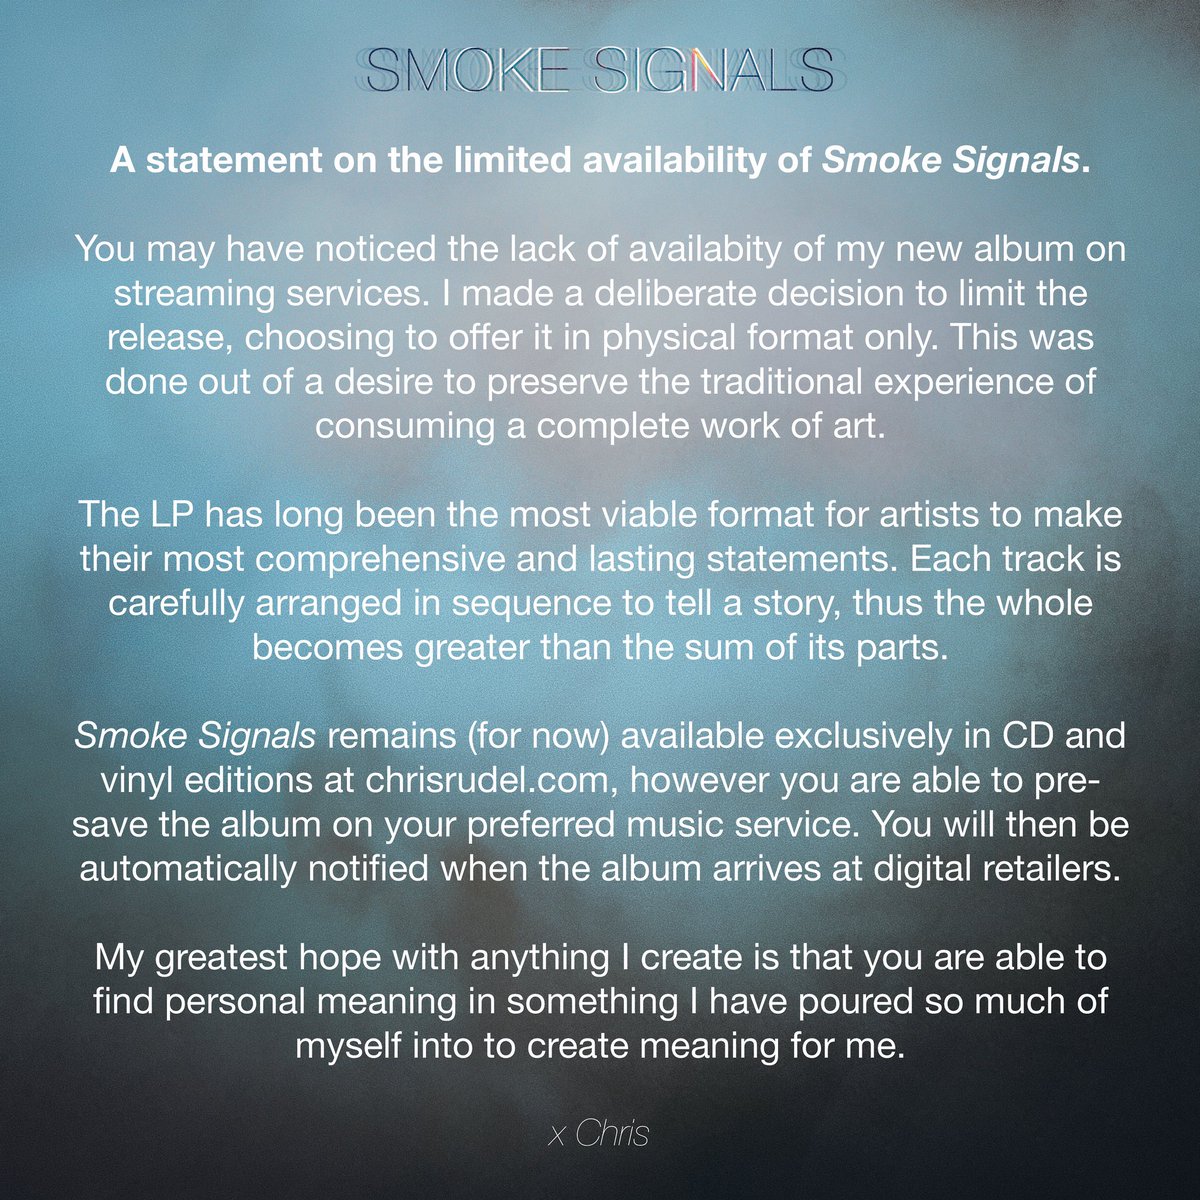 A statement on the limited availability of my new album #SMOKESIGNALS 

SMOKE SIGNALS / OUT NOW
Available exclusively at chrisrudel.com